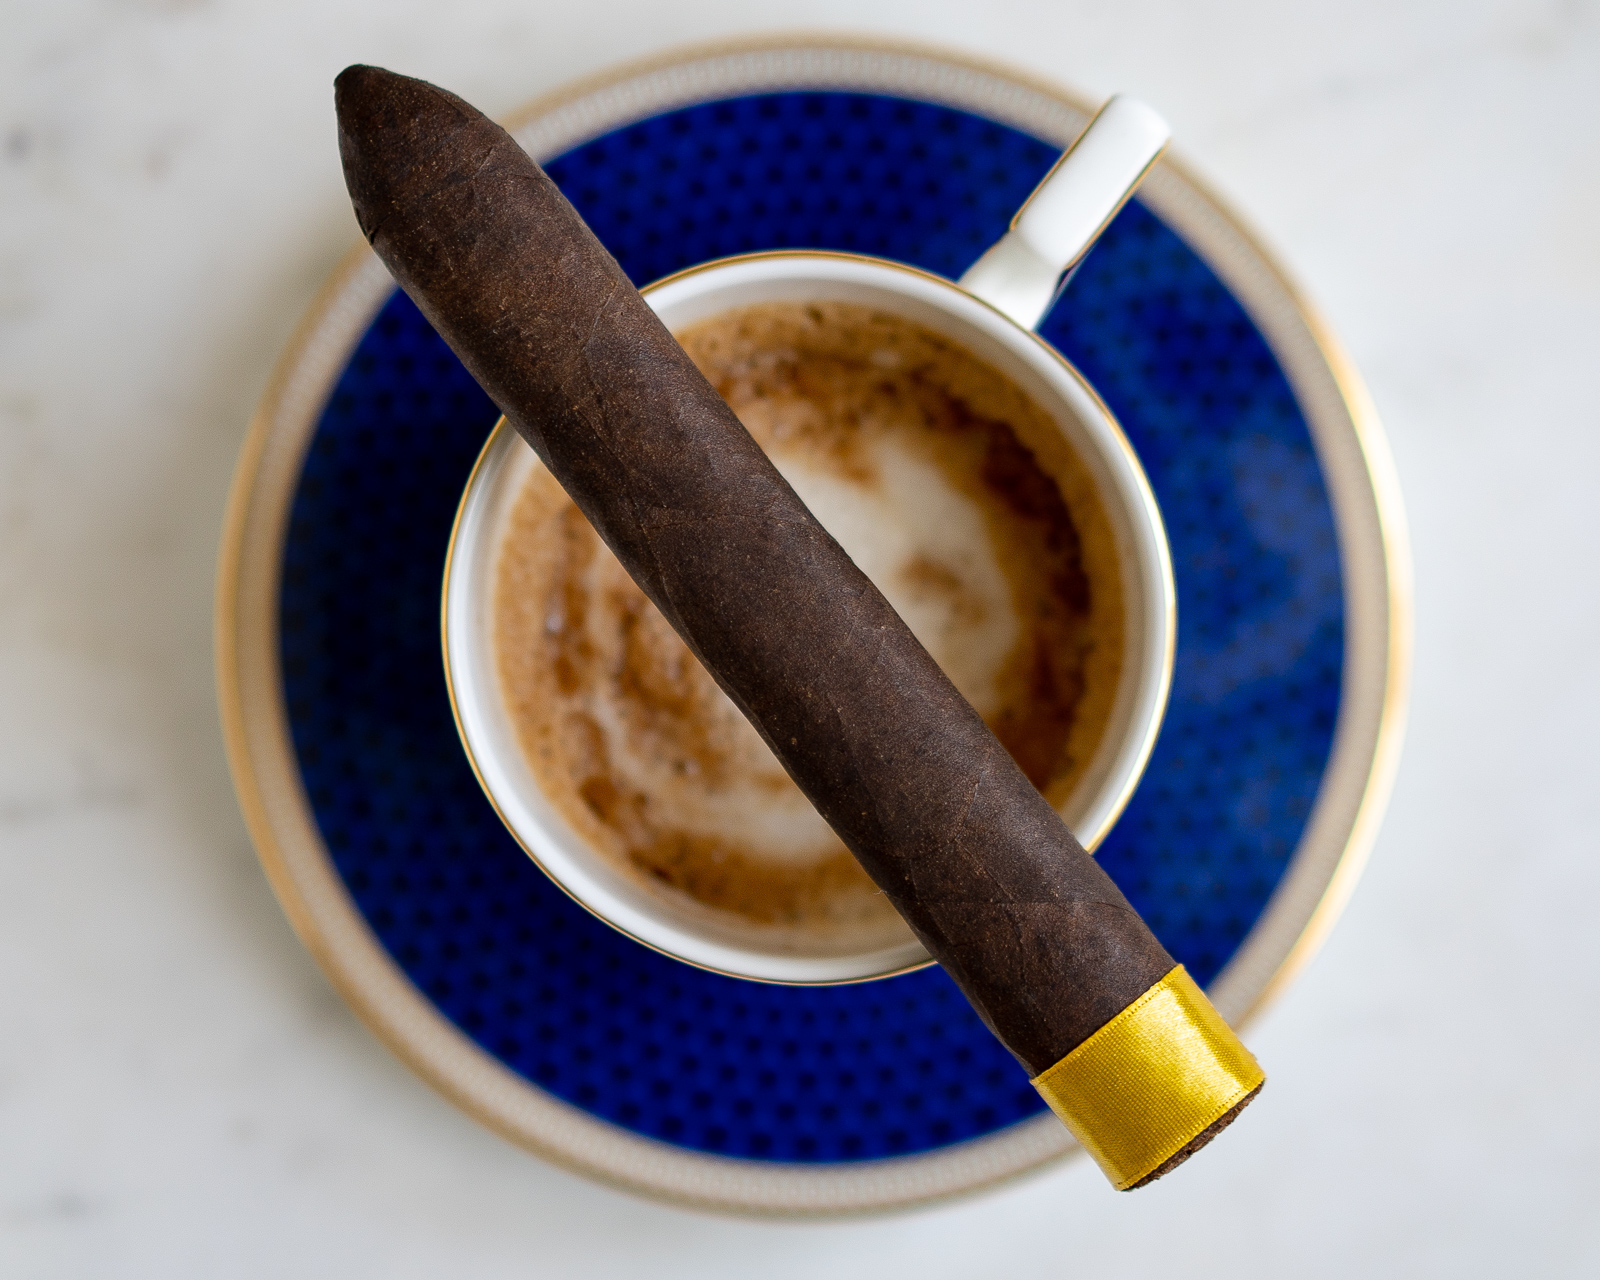 Crowned Heads Yellow Rose Review